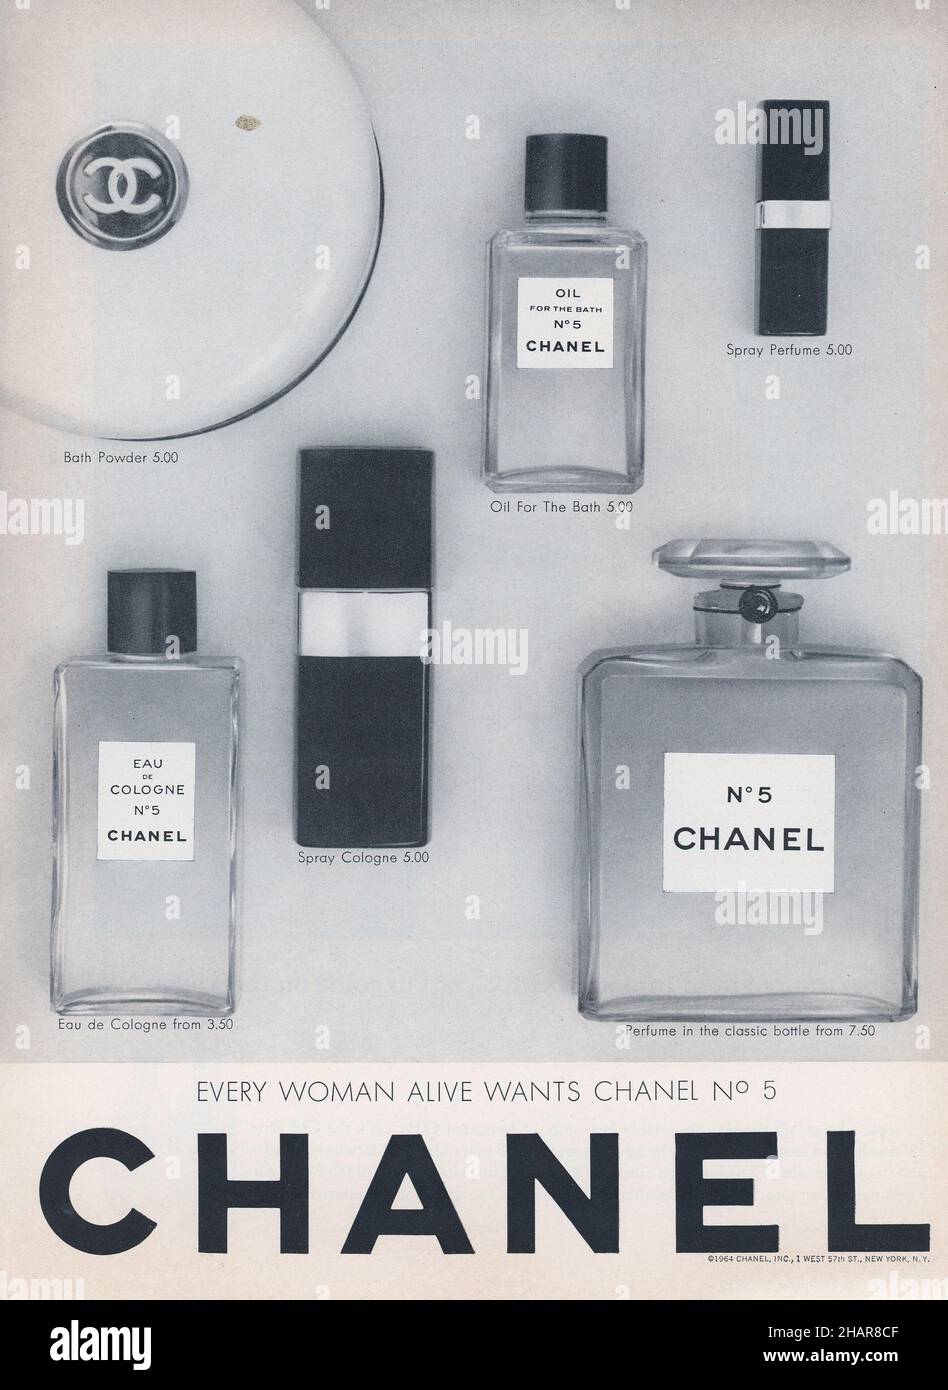 new chanel number 5